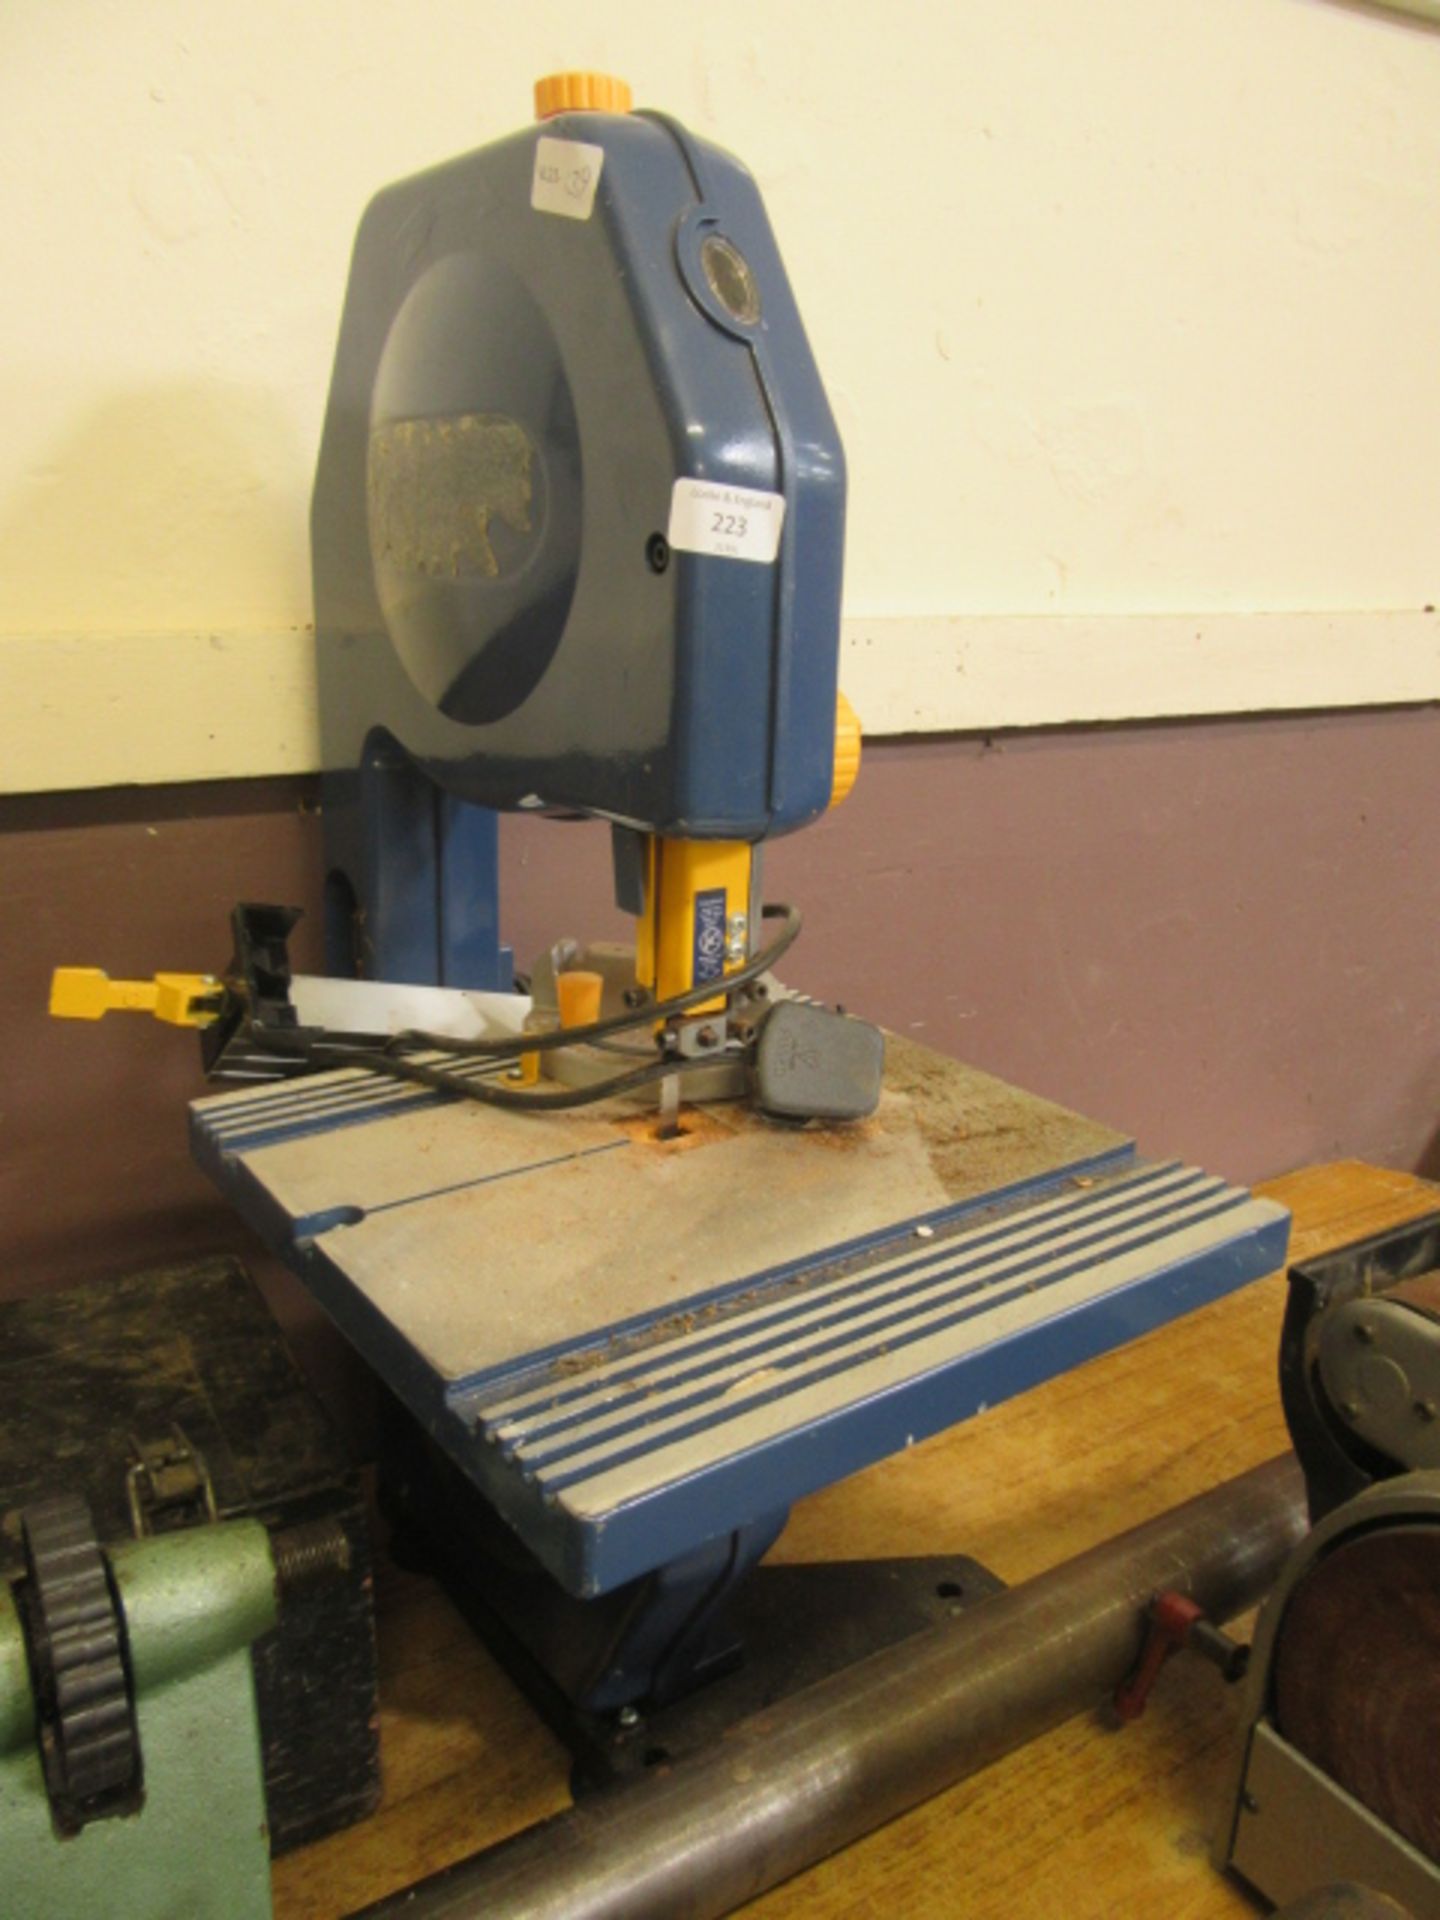 An electric bandsaw